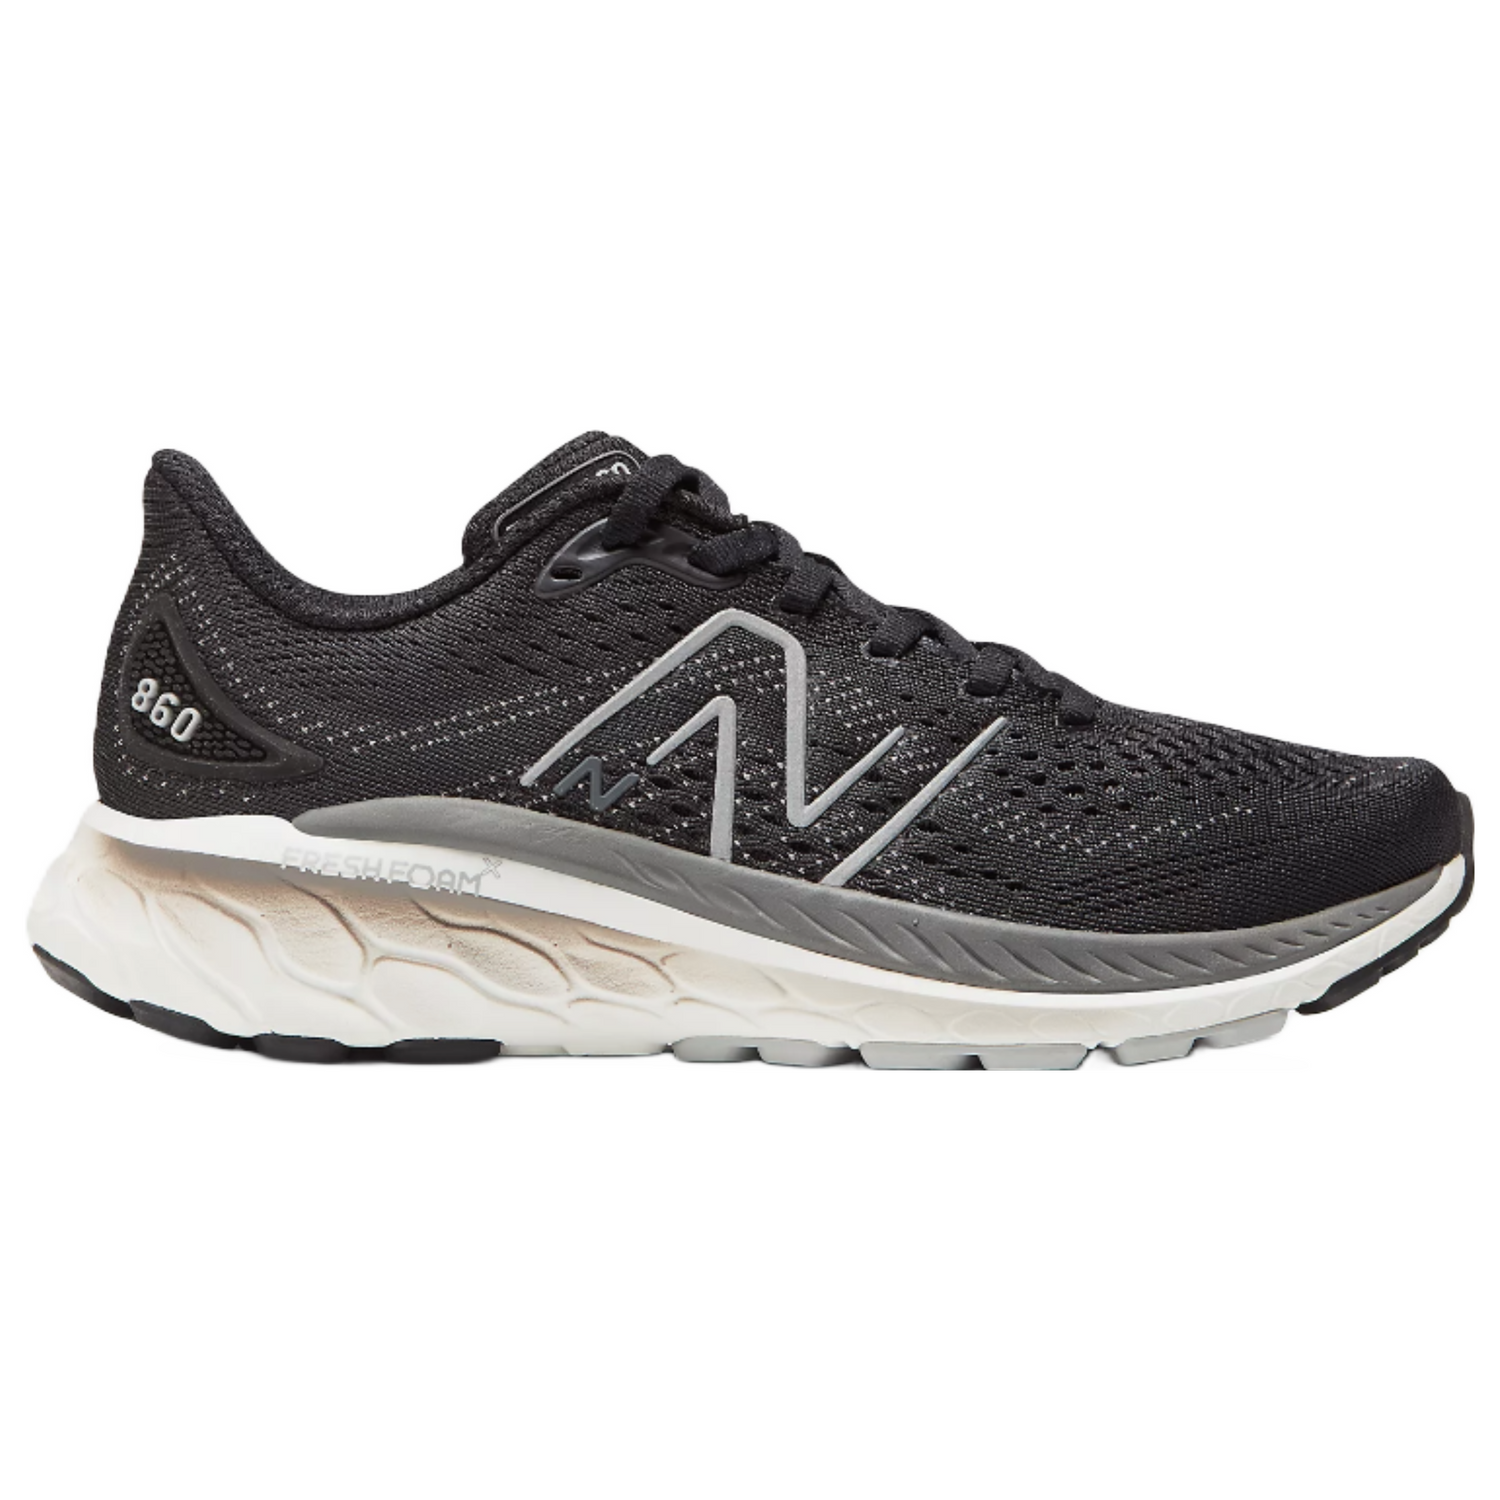 New Balance Women's 860 stability running shoes in black